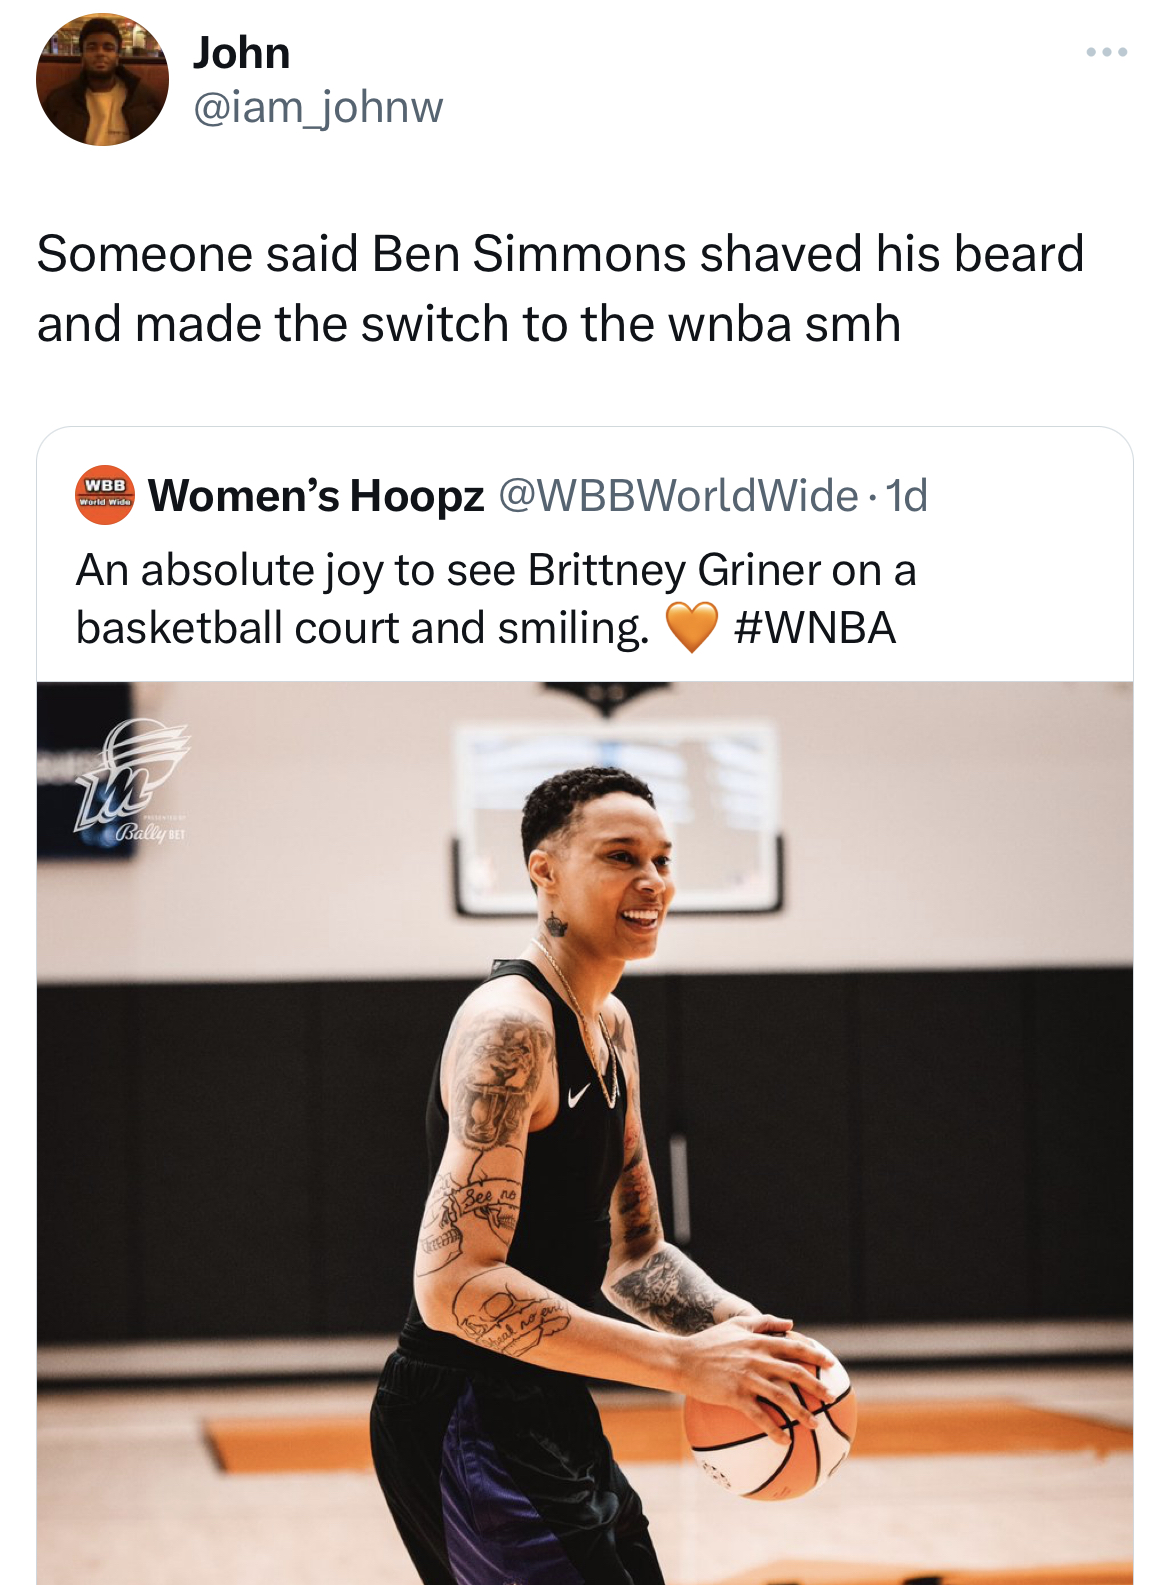 Tweets dunking on celebs - Brittney Griner - John Someone said Ben Simmons shaved his beard and made the switch to the wnba smh Women's Hoopz 1d An absolute joy to see Brittney Griner on a basketball court and smiling.